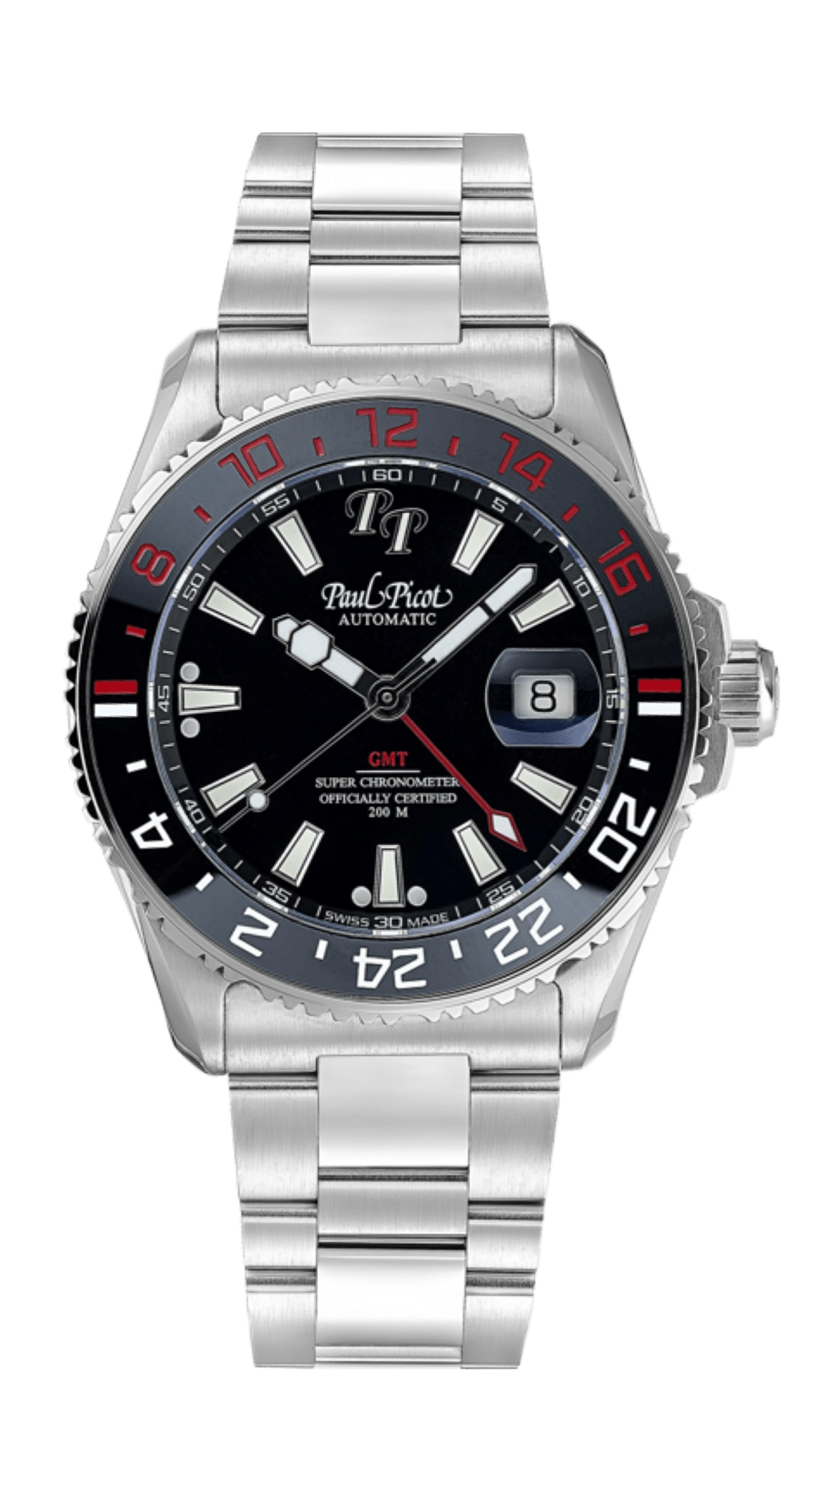 PAUL PICOT PAUL MARINER 5 GMT CHRONOMETER OFFICIALLY CERTIFIED BY COSC Automatic 42mm Ceramic Bezel BLACK Dial Steel Bracelet 4353SG-CN